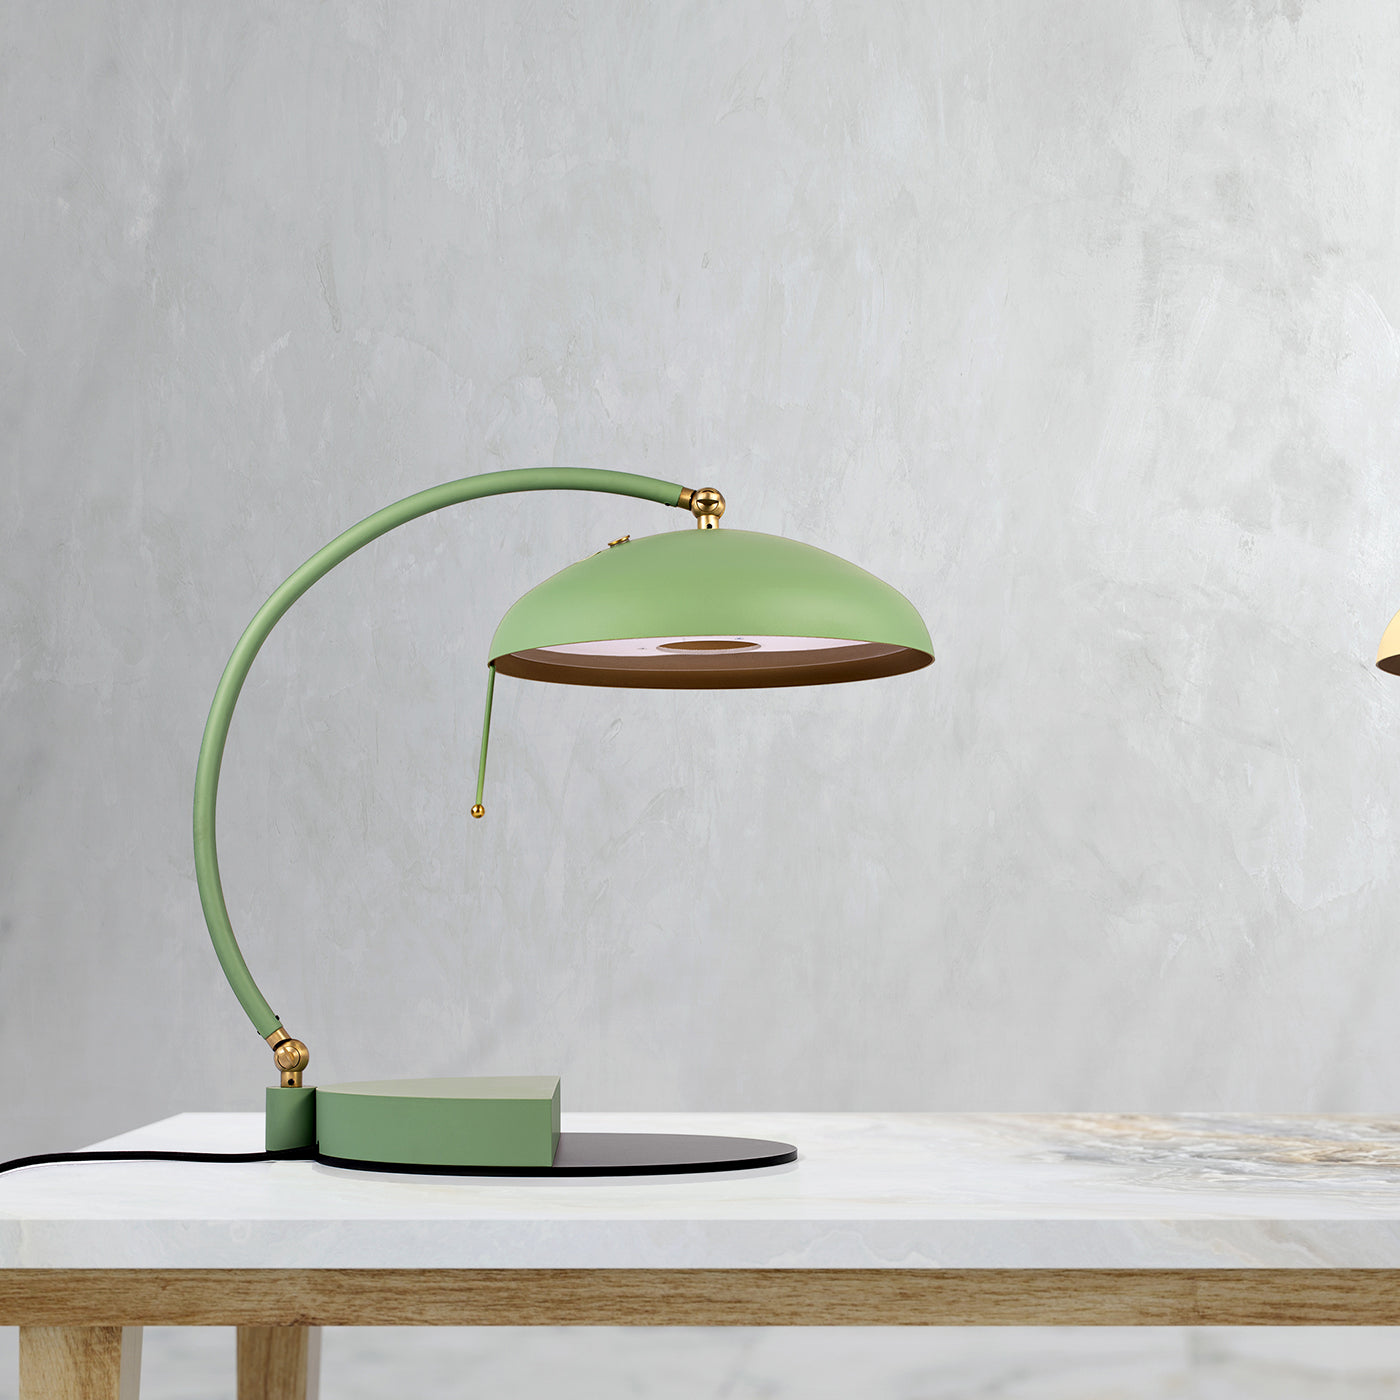 Serena Ministeriale Green Table Lamp with Walnut Wood Details - Alternative view 1